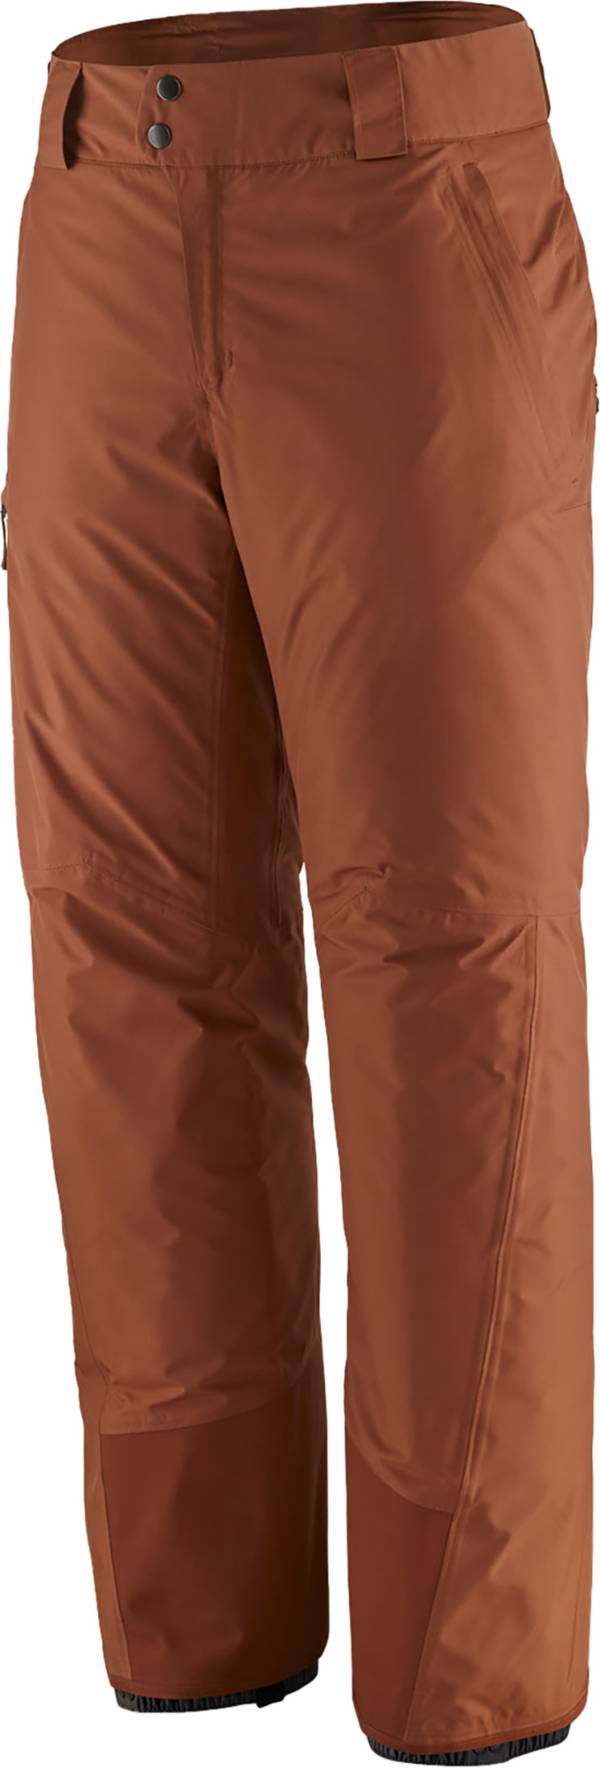 Patagonia Men's Insulated Powder Town Pants product image